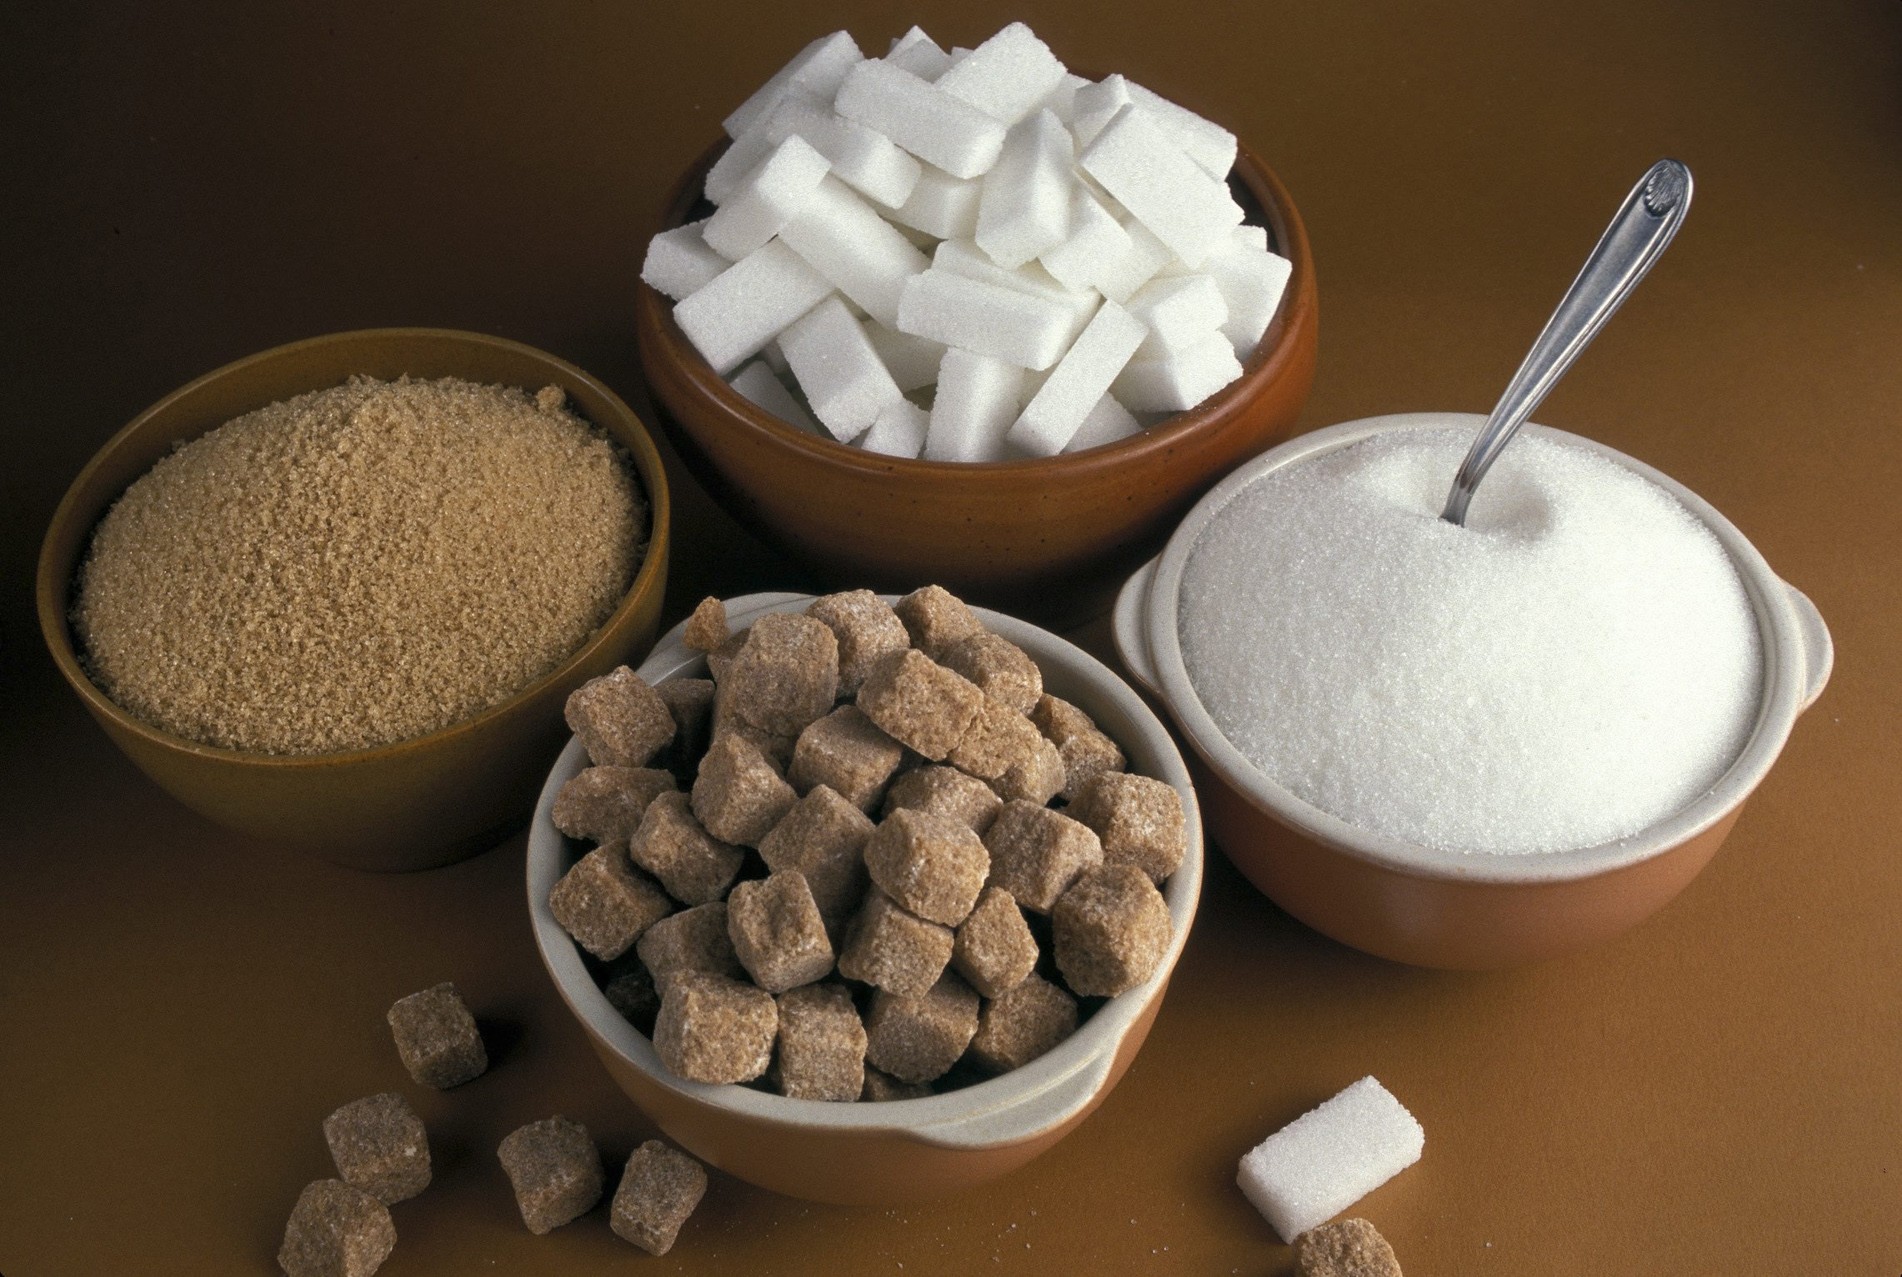 With the increasing availability of sugar, obesity and weight-related diseases began to increase.